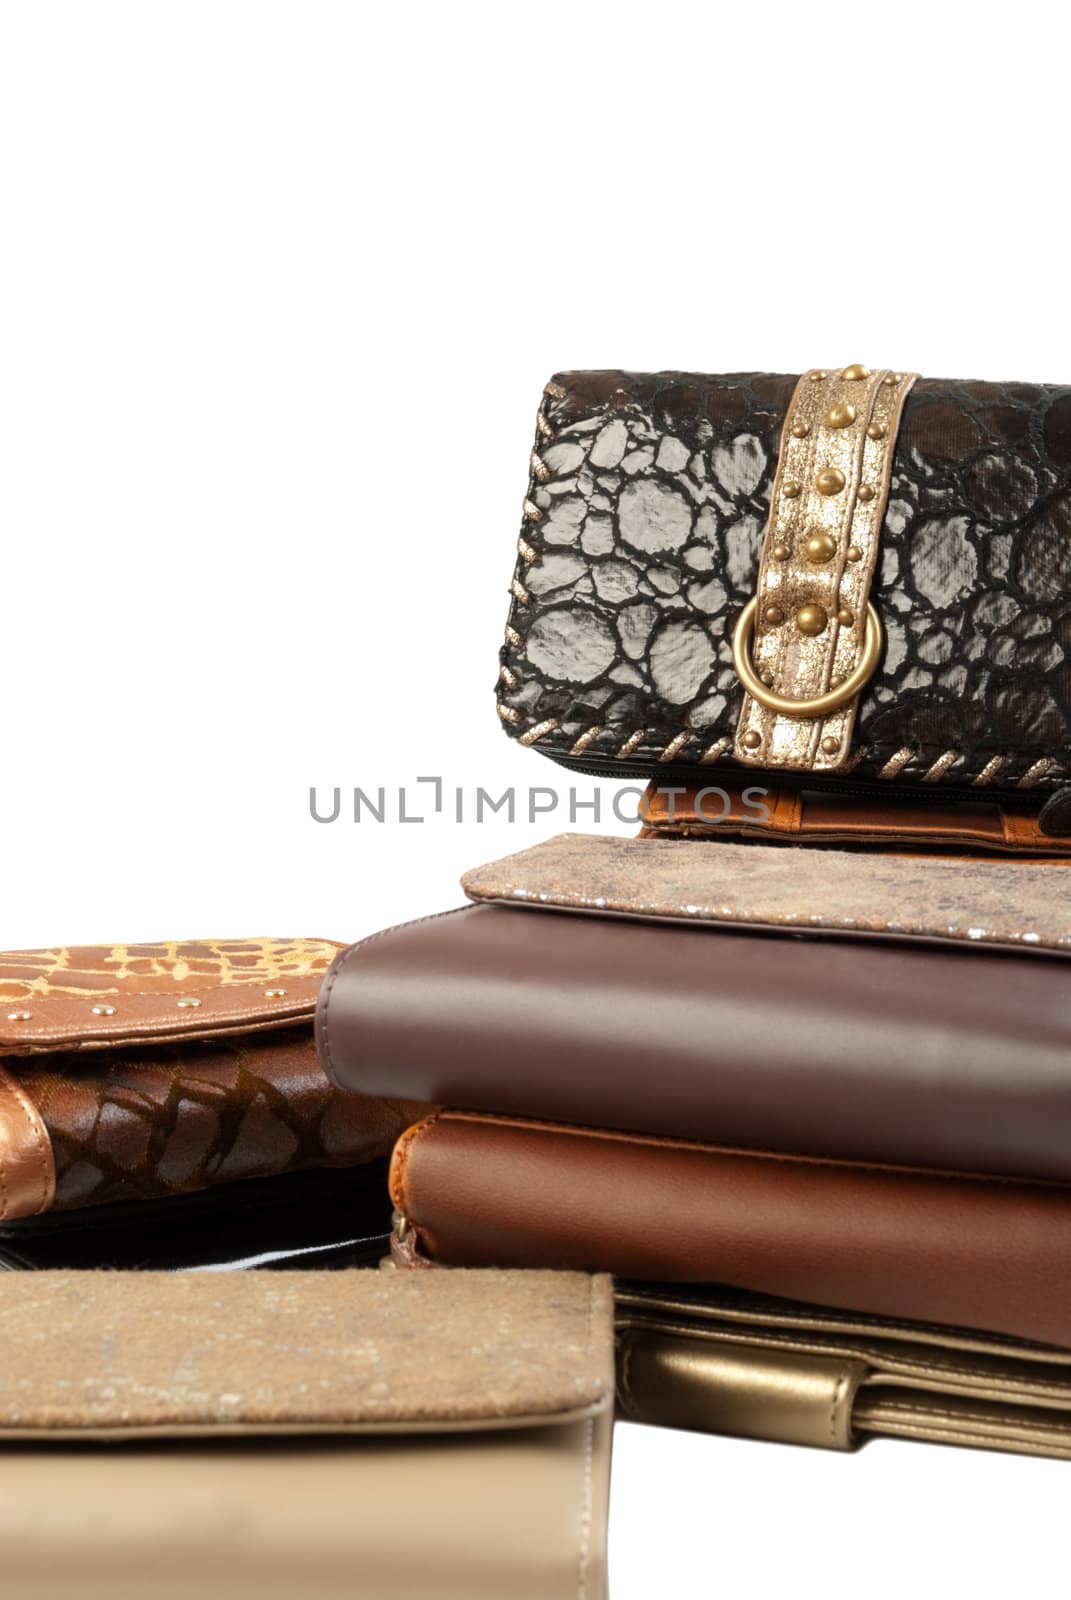 10 leather purses in stack. Isolated on white background